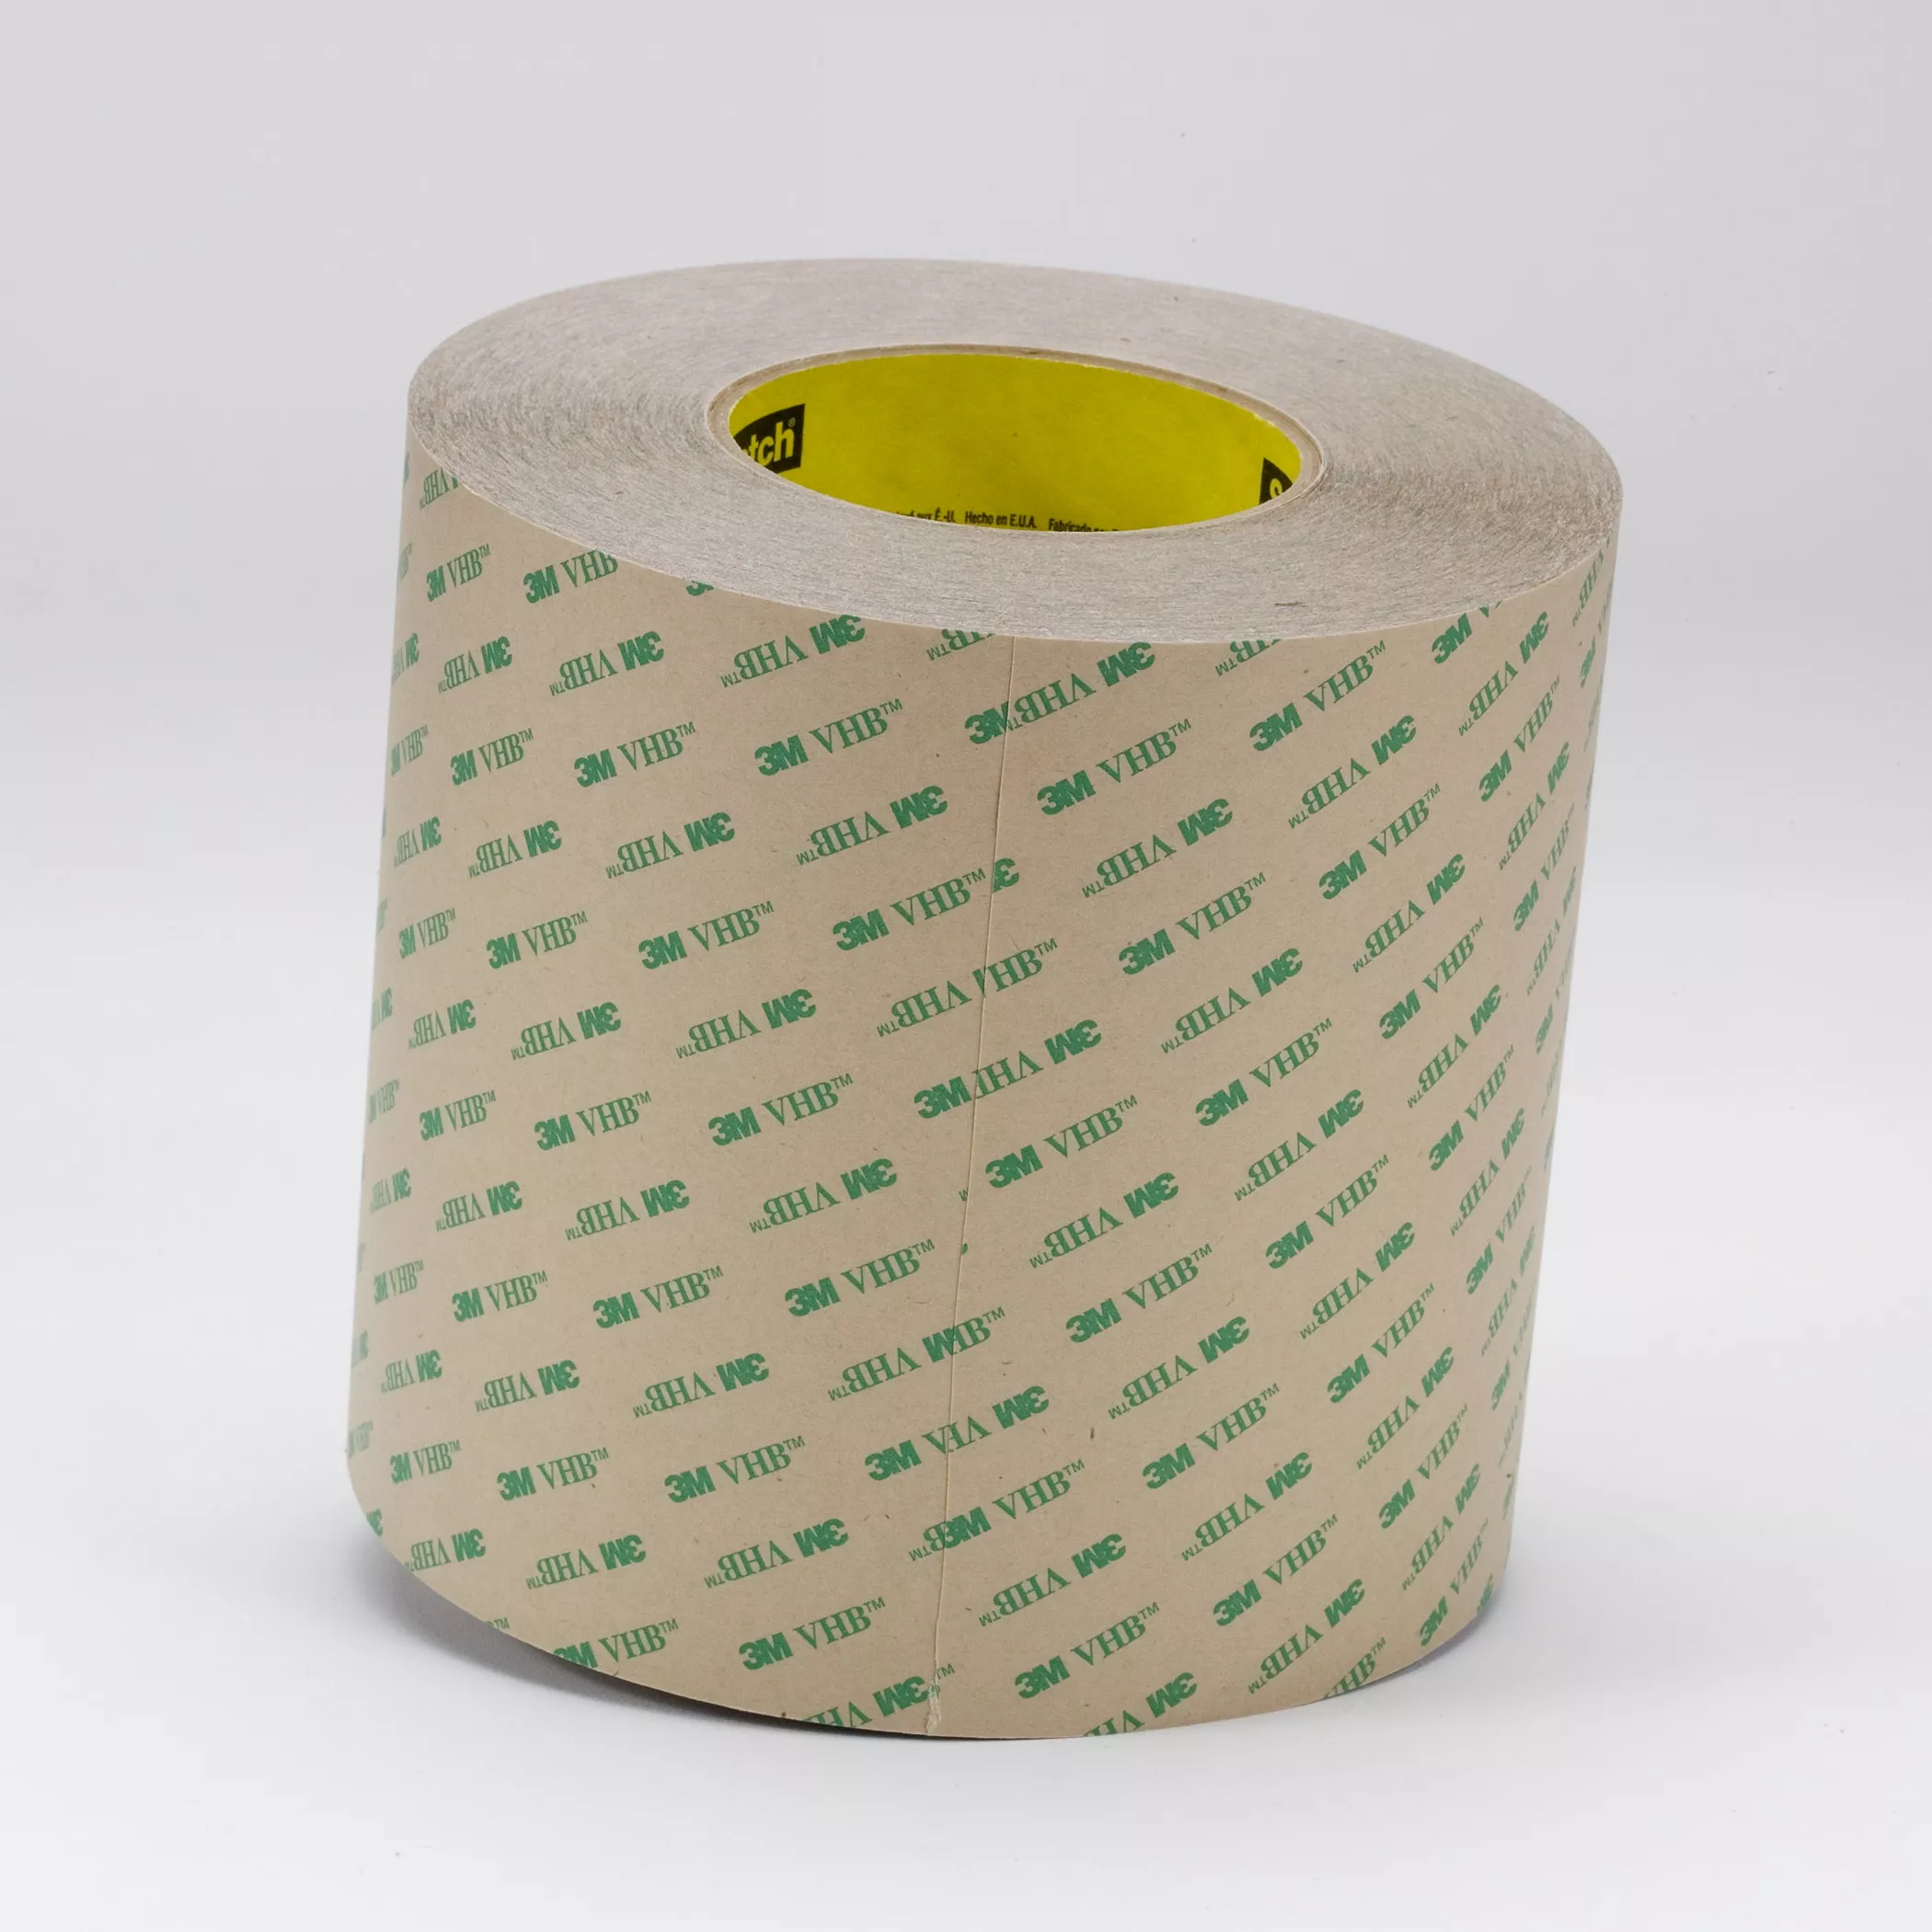 3M™ VHB™ Adhesive Transfer Tape F9473PC, Clear, 48 in x 60 yd, 10 mil, 1
Roll/Case